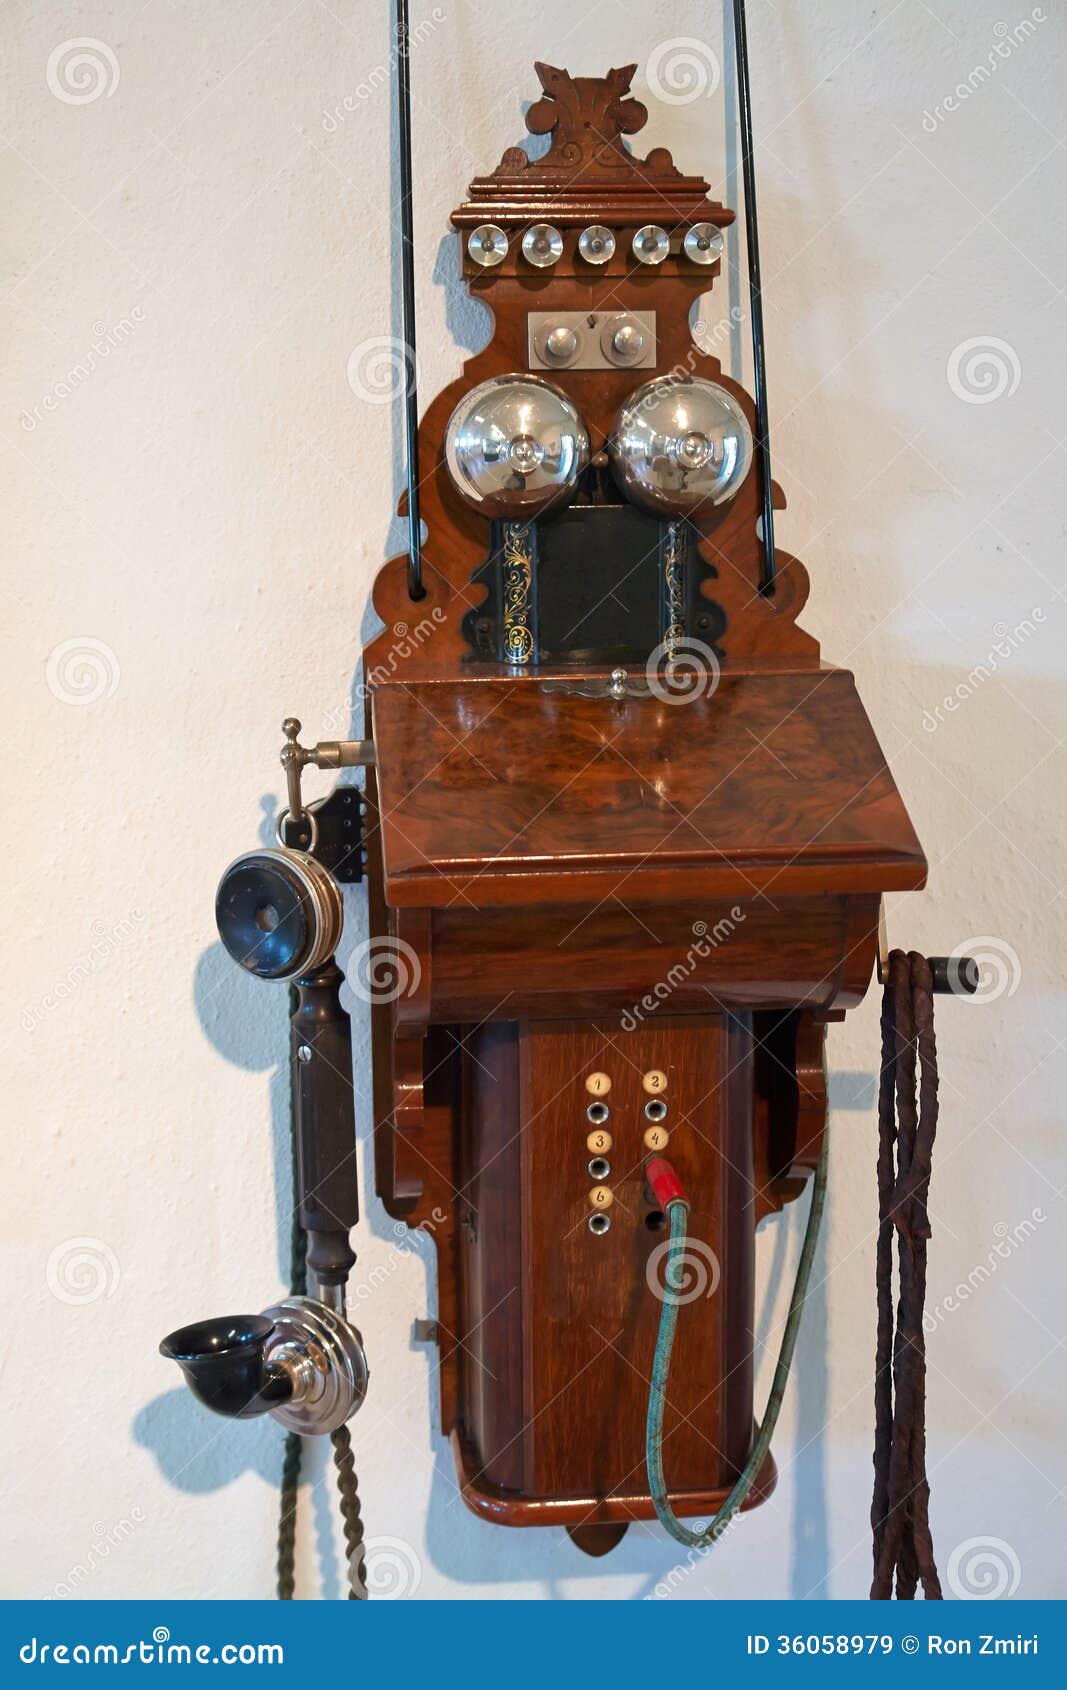 Antique Wooden Telephone Royalty Free Stock Images - Image 